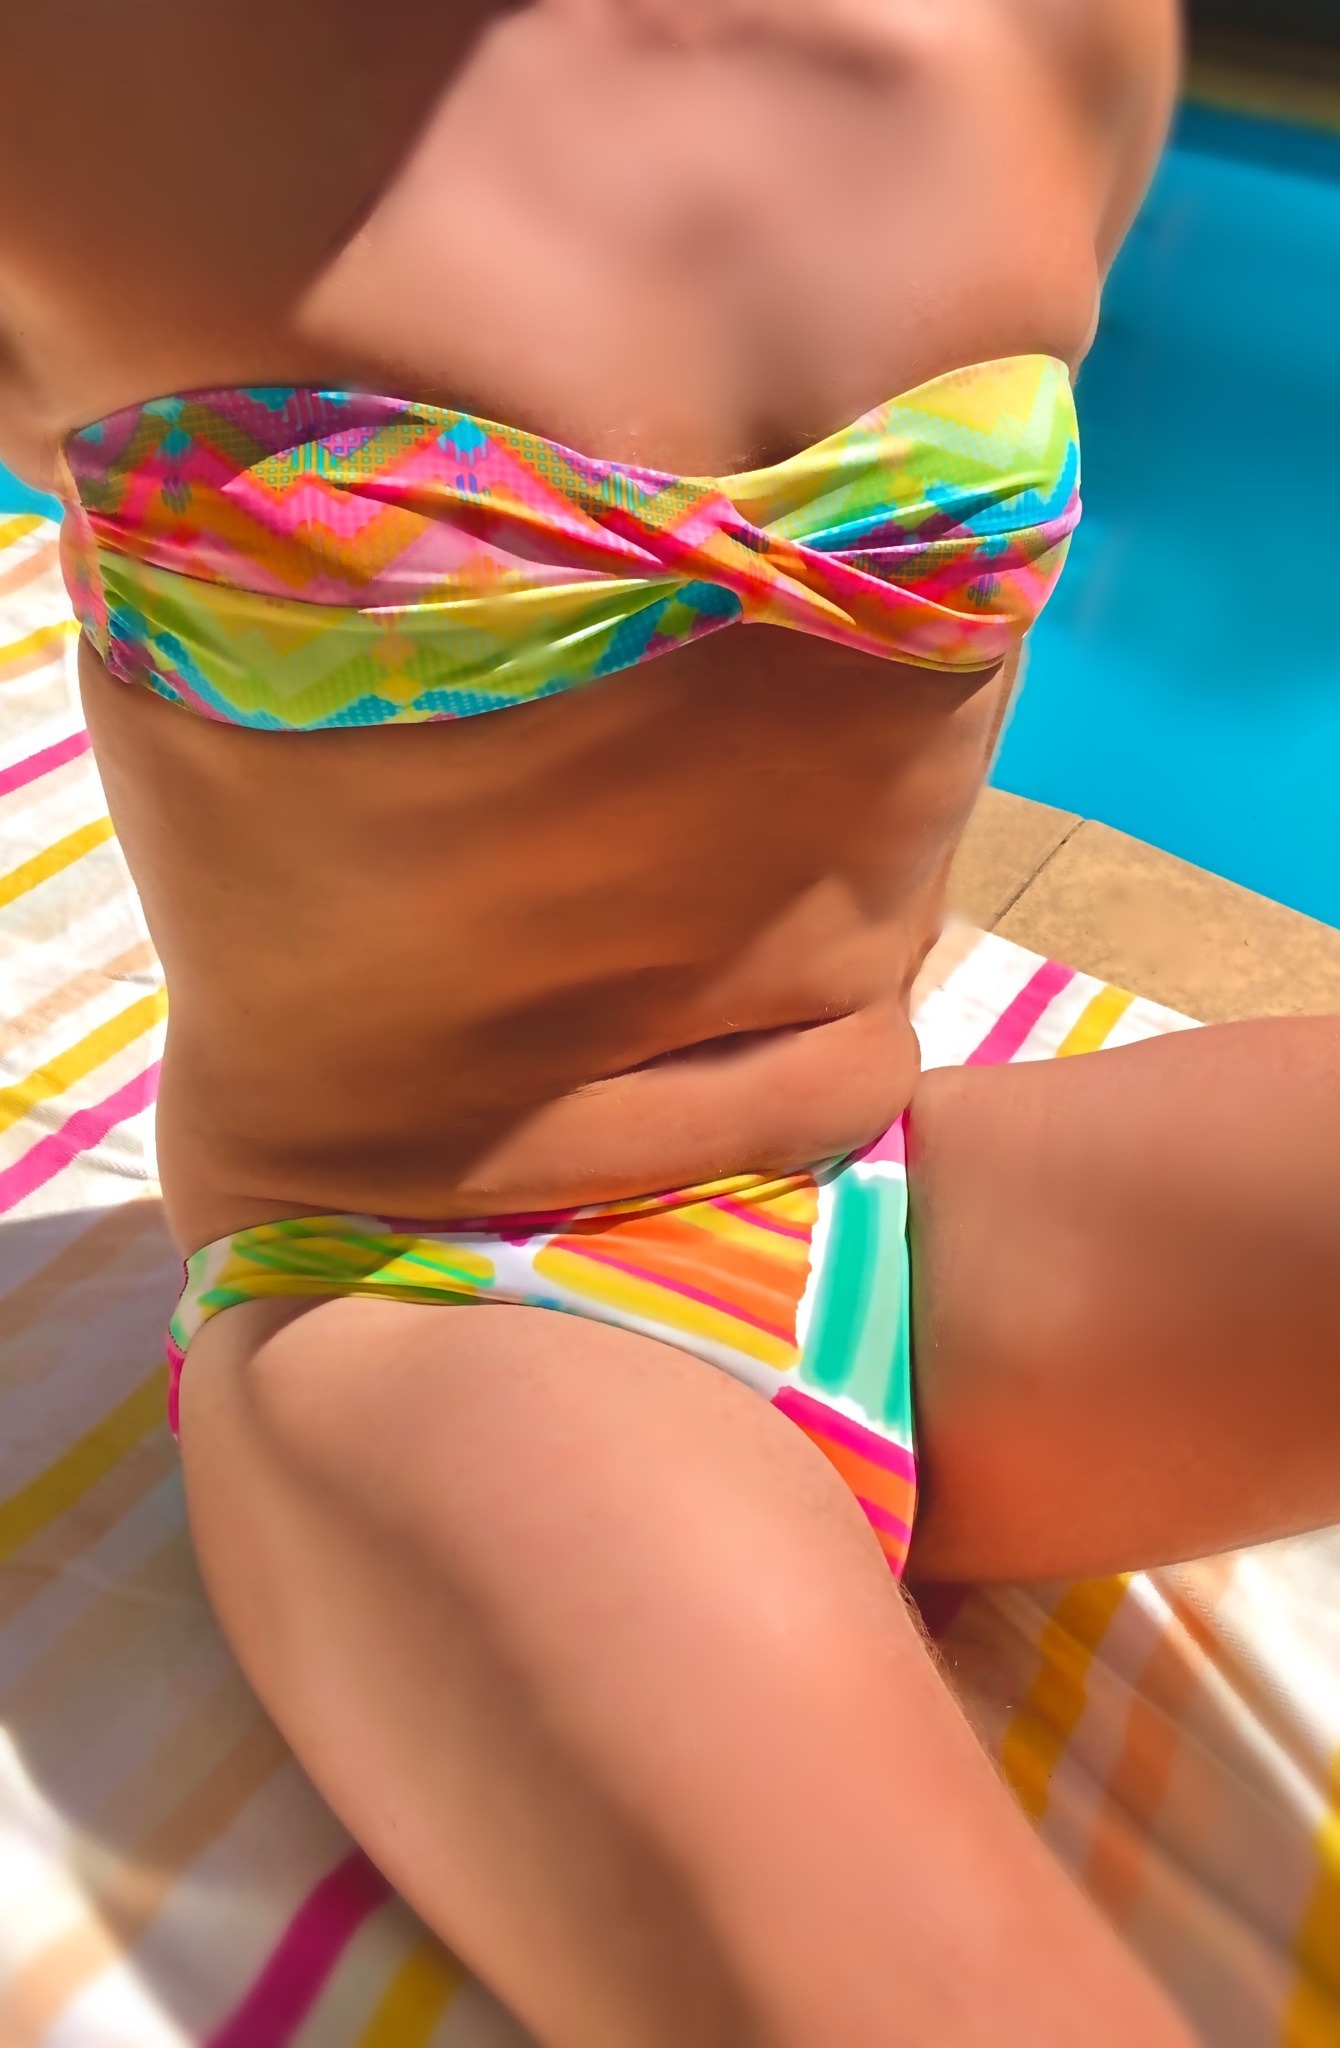 vitamin-sea-for-me:I just love how colorful this bikini isI’d love to know if you like it too!